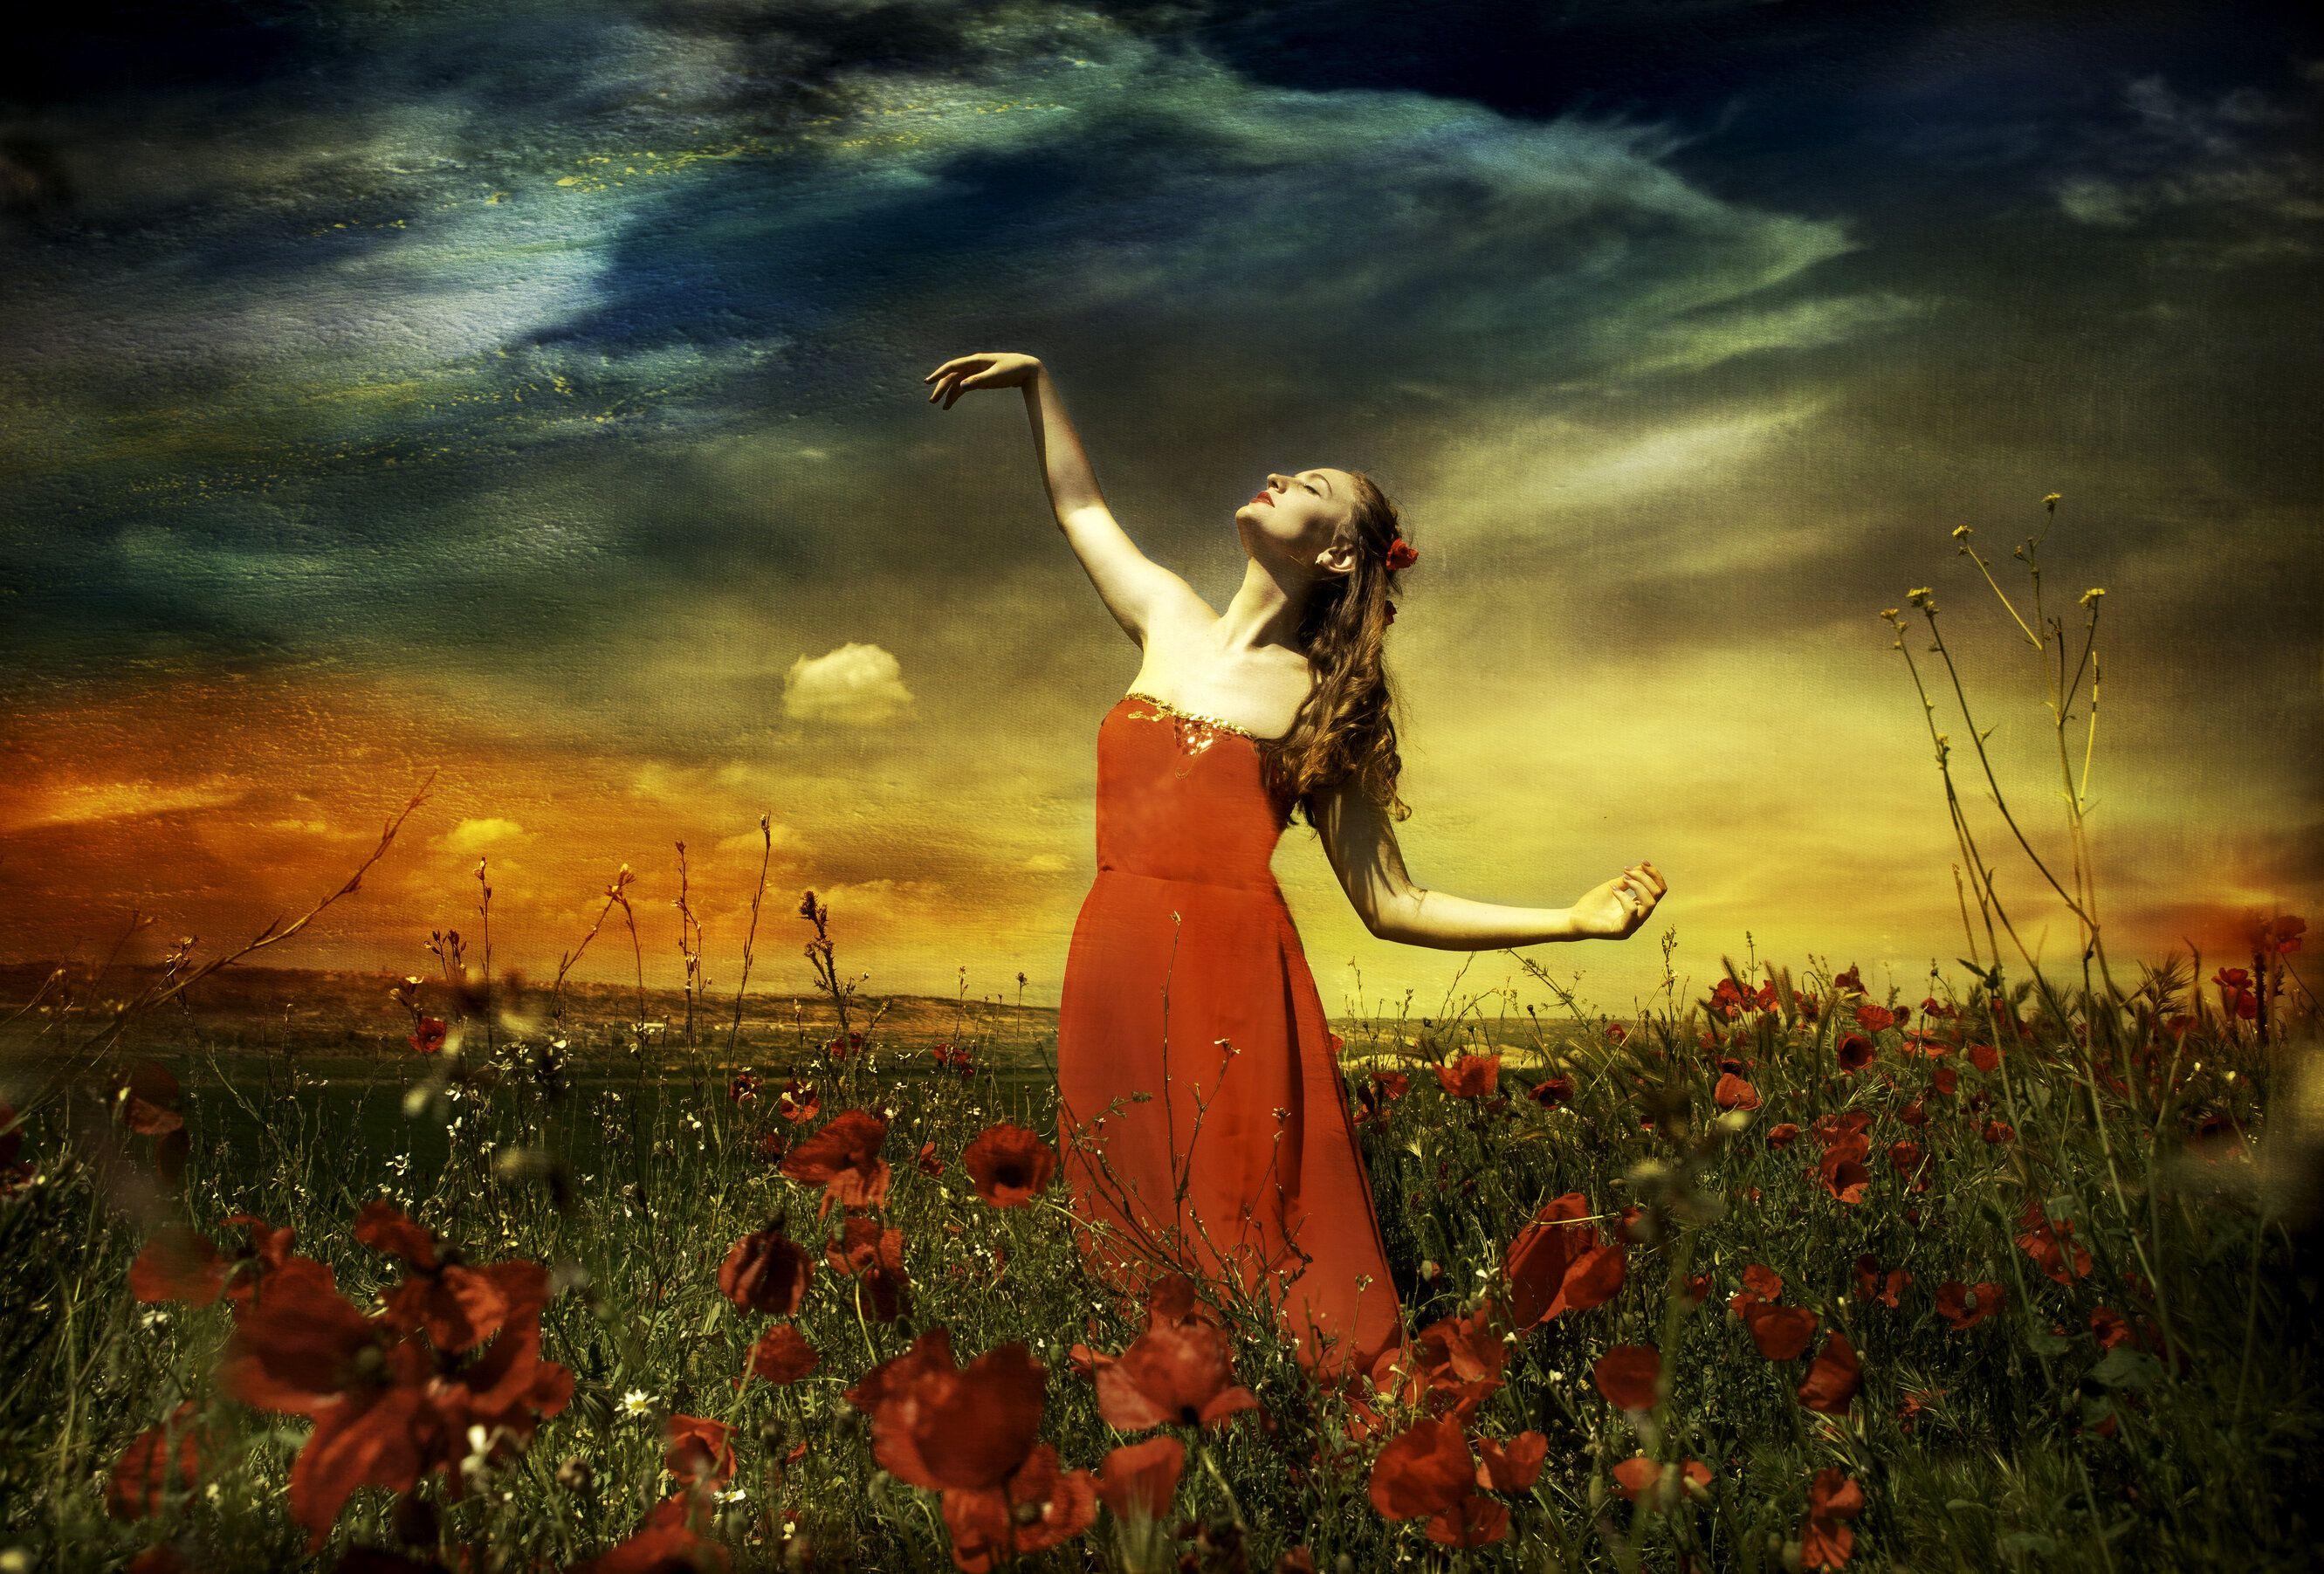 Viet Ha Tran Color Photograph - Summer on the poppy field, Photograph, C-Type